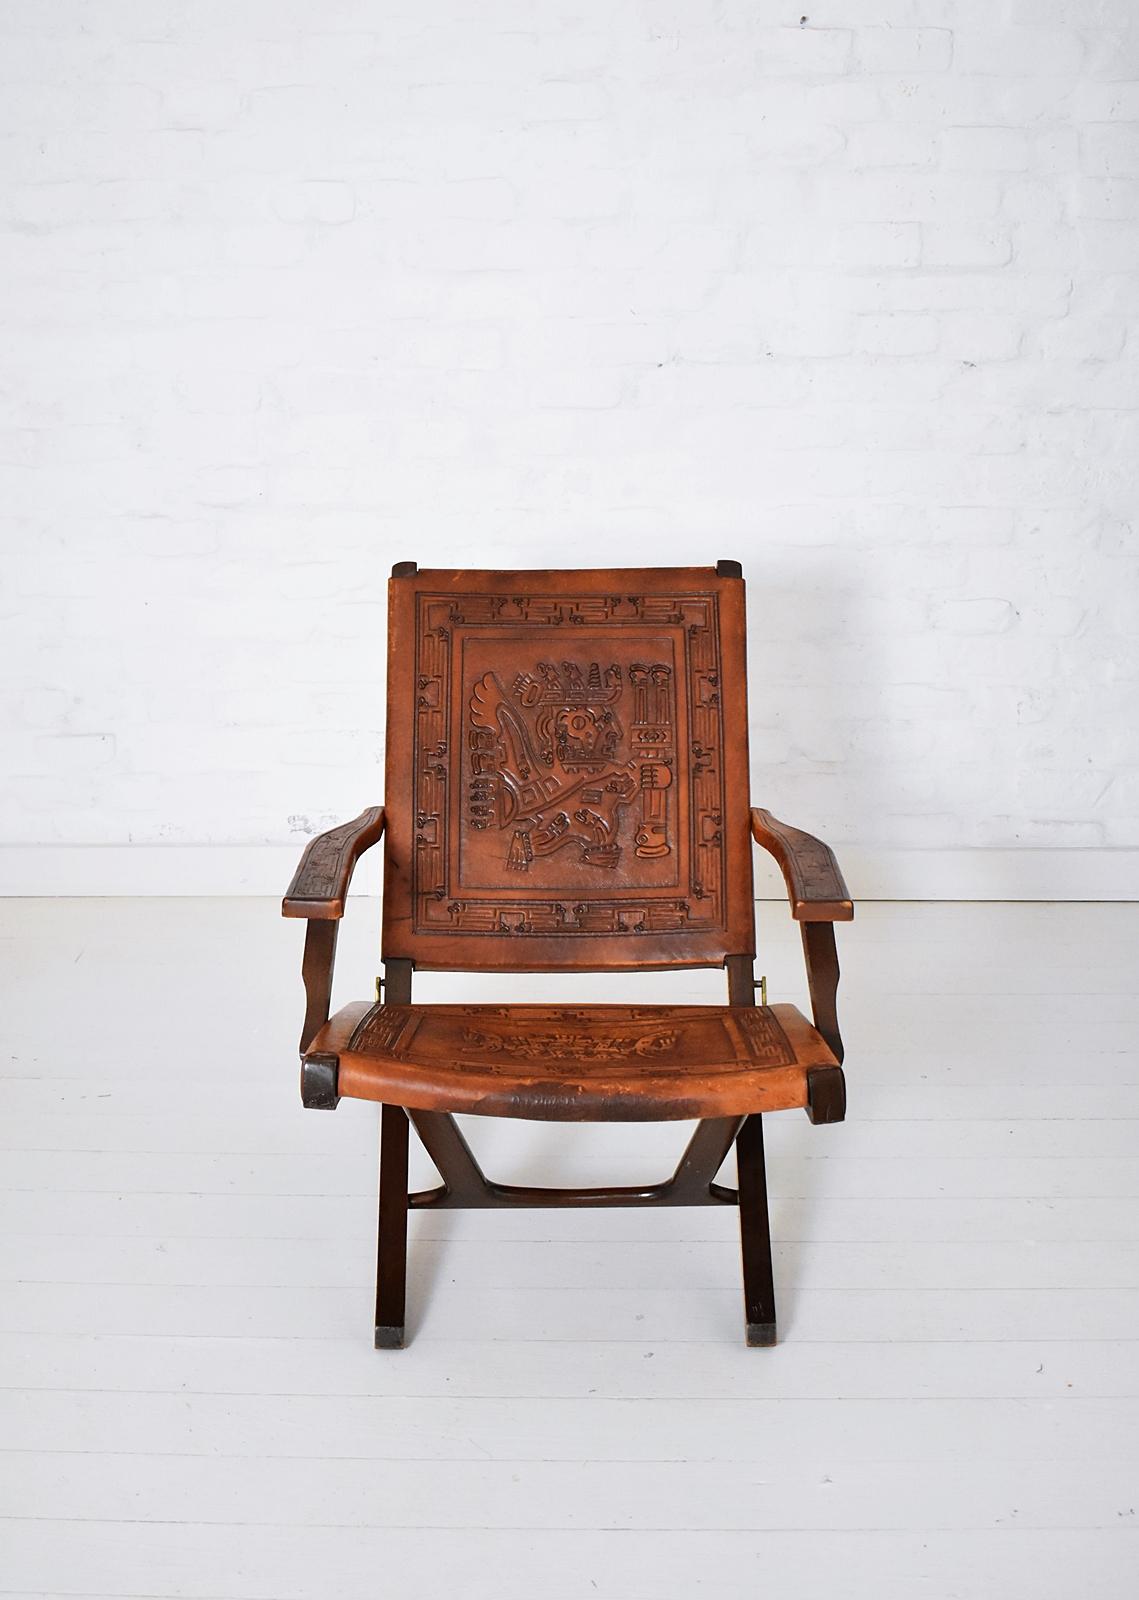 This folding chair was designed by Angel Pazmino. It was produced by Muebles de Estilo.
Pazmino was inspired by Danish designer Hans Wegner and designed his own folding chair.
 Saddle leather and wood with Inca motive.
 






     